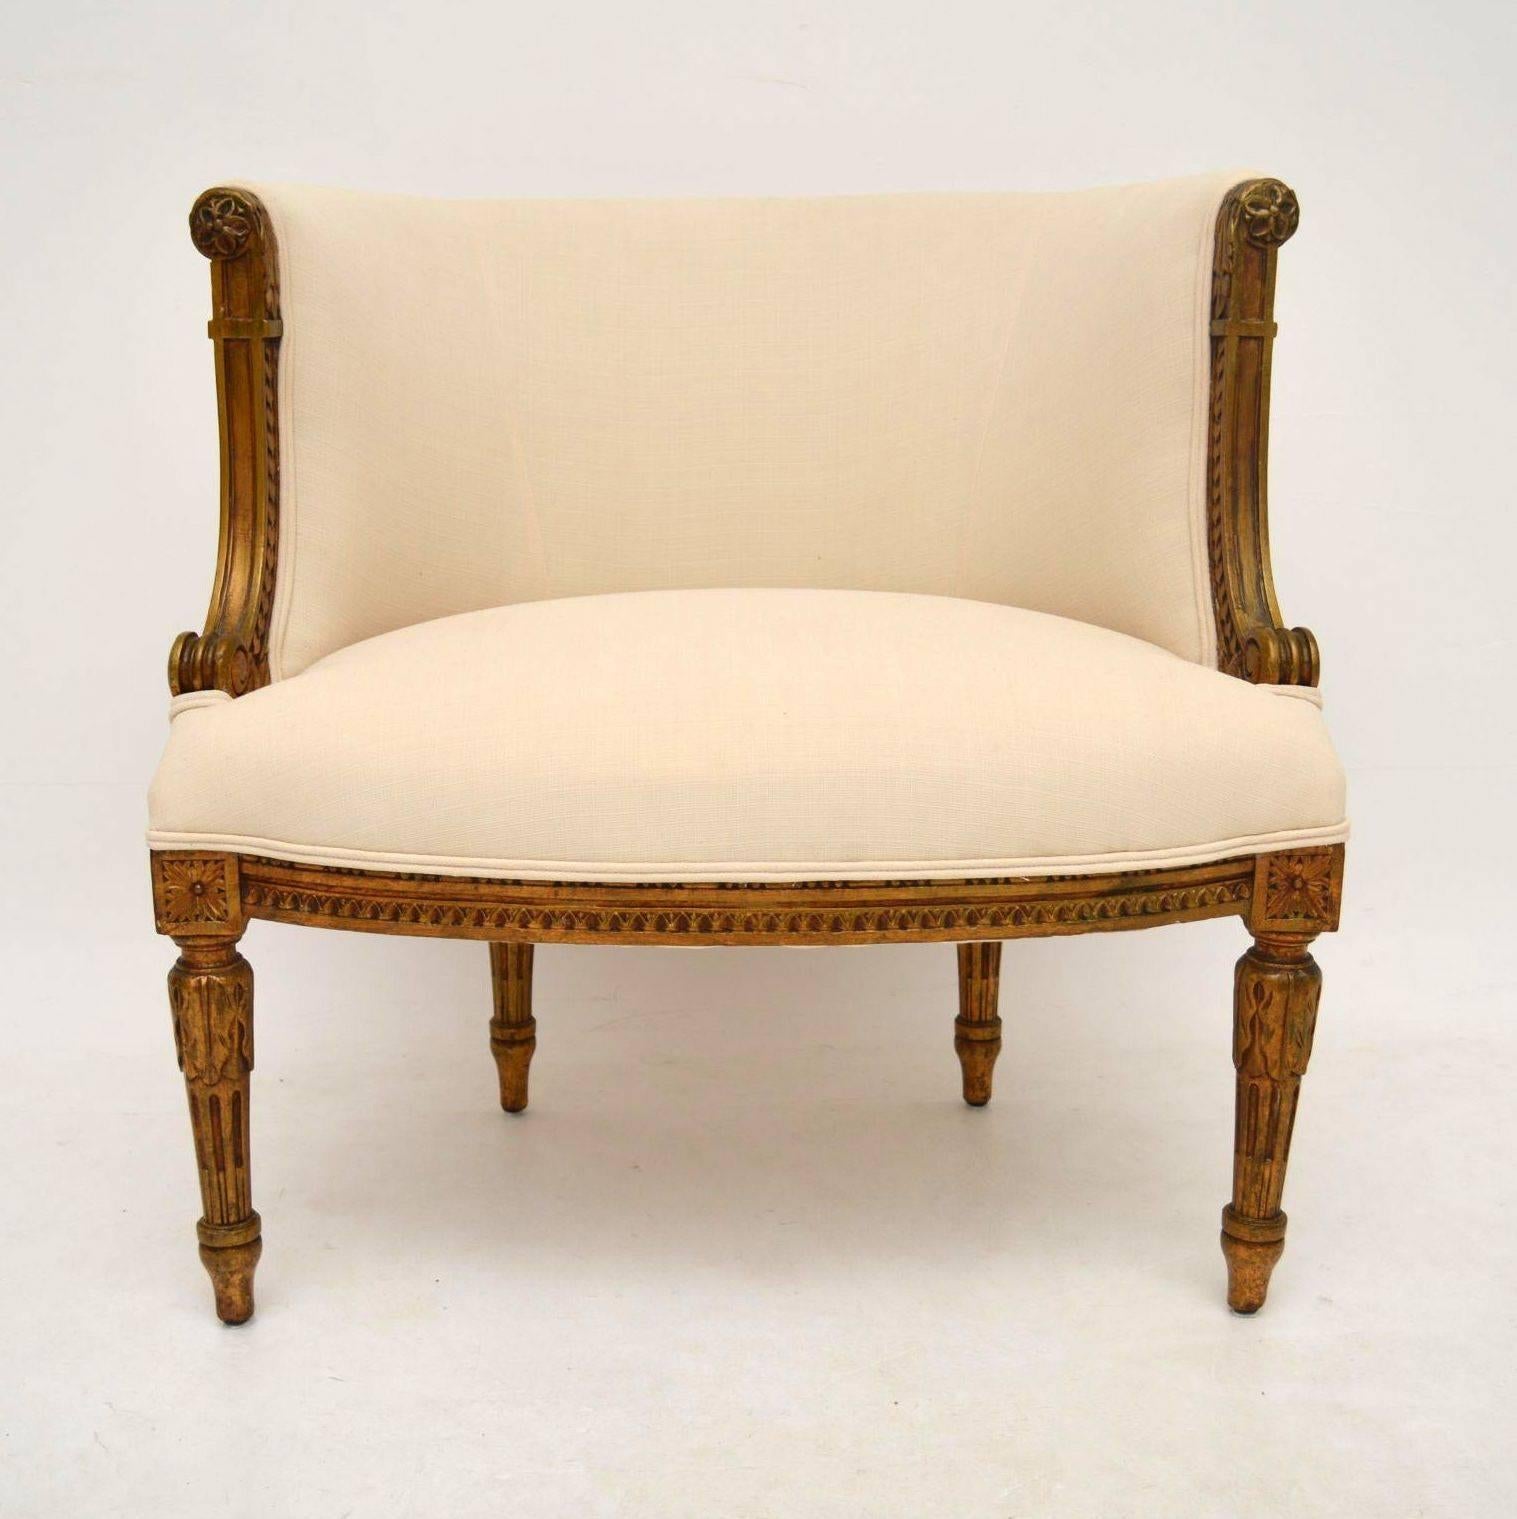 Attractive small antique French giltwood armchair in good original condition, having just been re-upholstered in a cream fabric with double piping. The gilding has a nice original look, with plenty of Fine carved detail within the wood. Please check